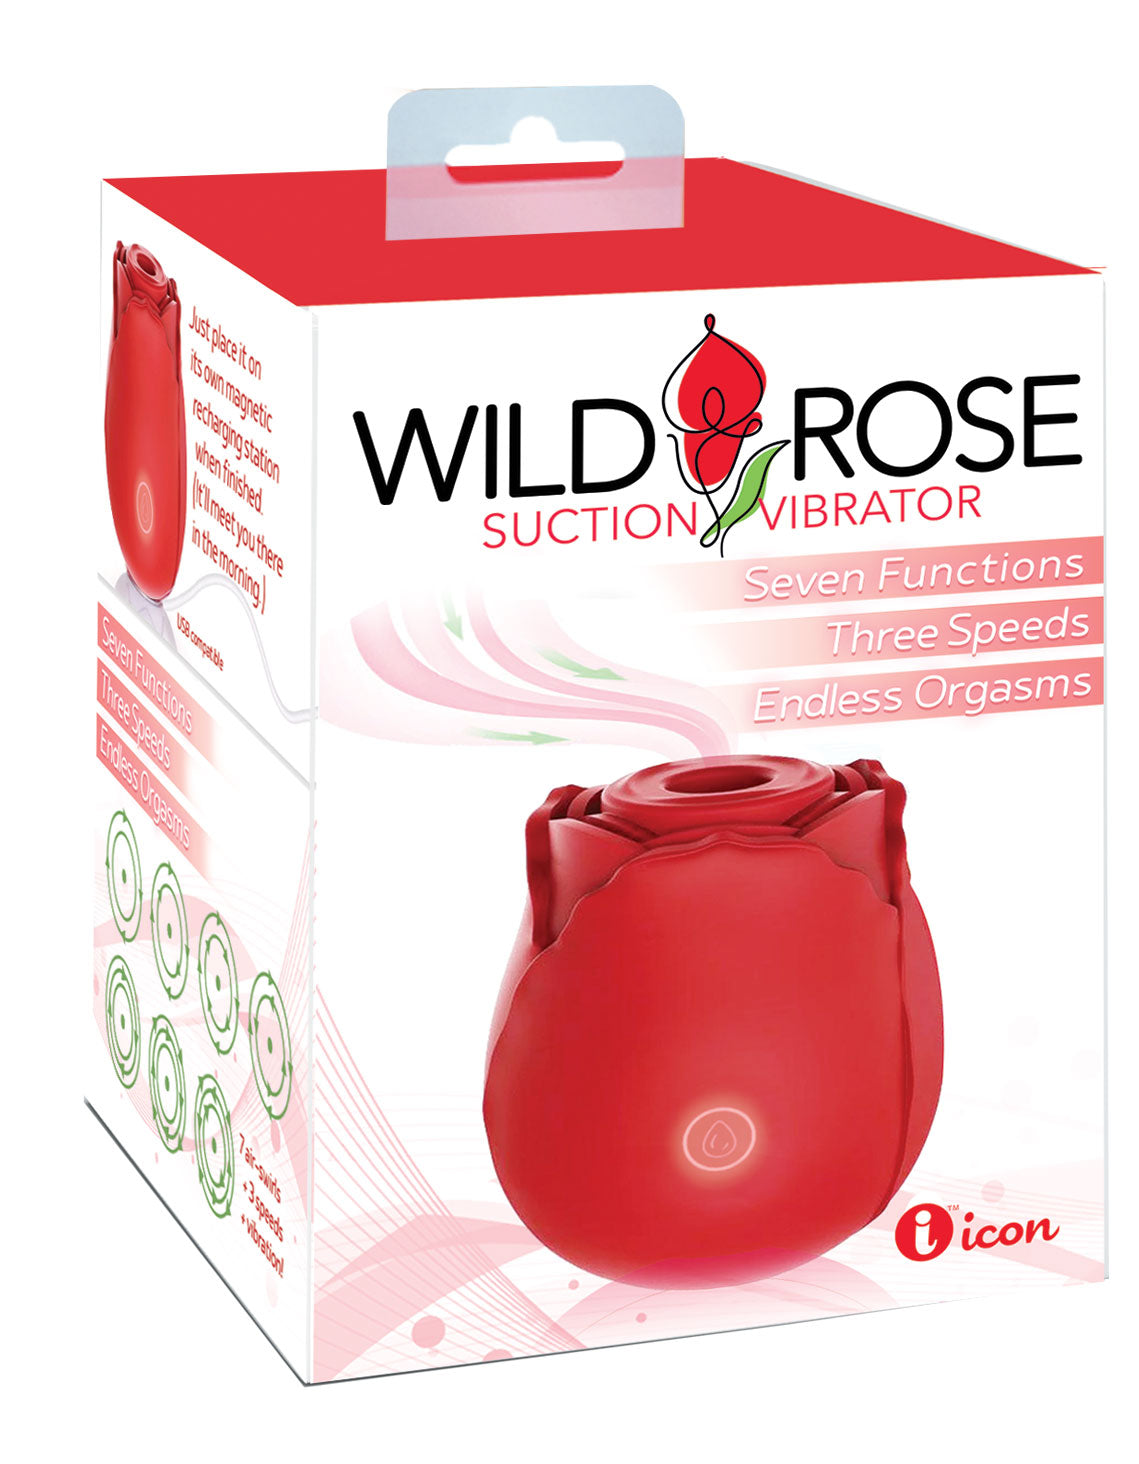 Wild Rose Suction Vibrators/Thrusters - Collection